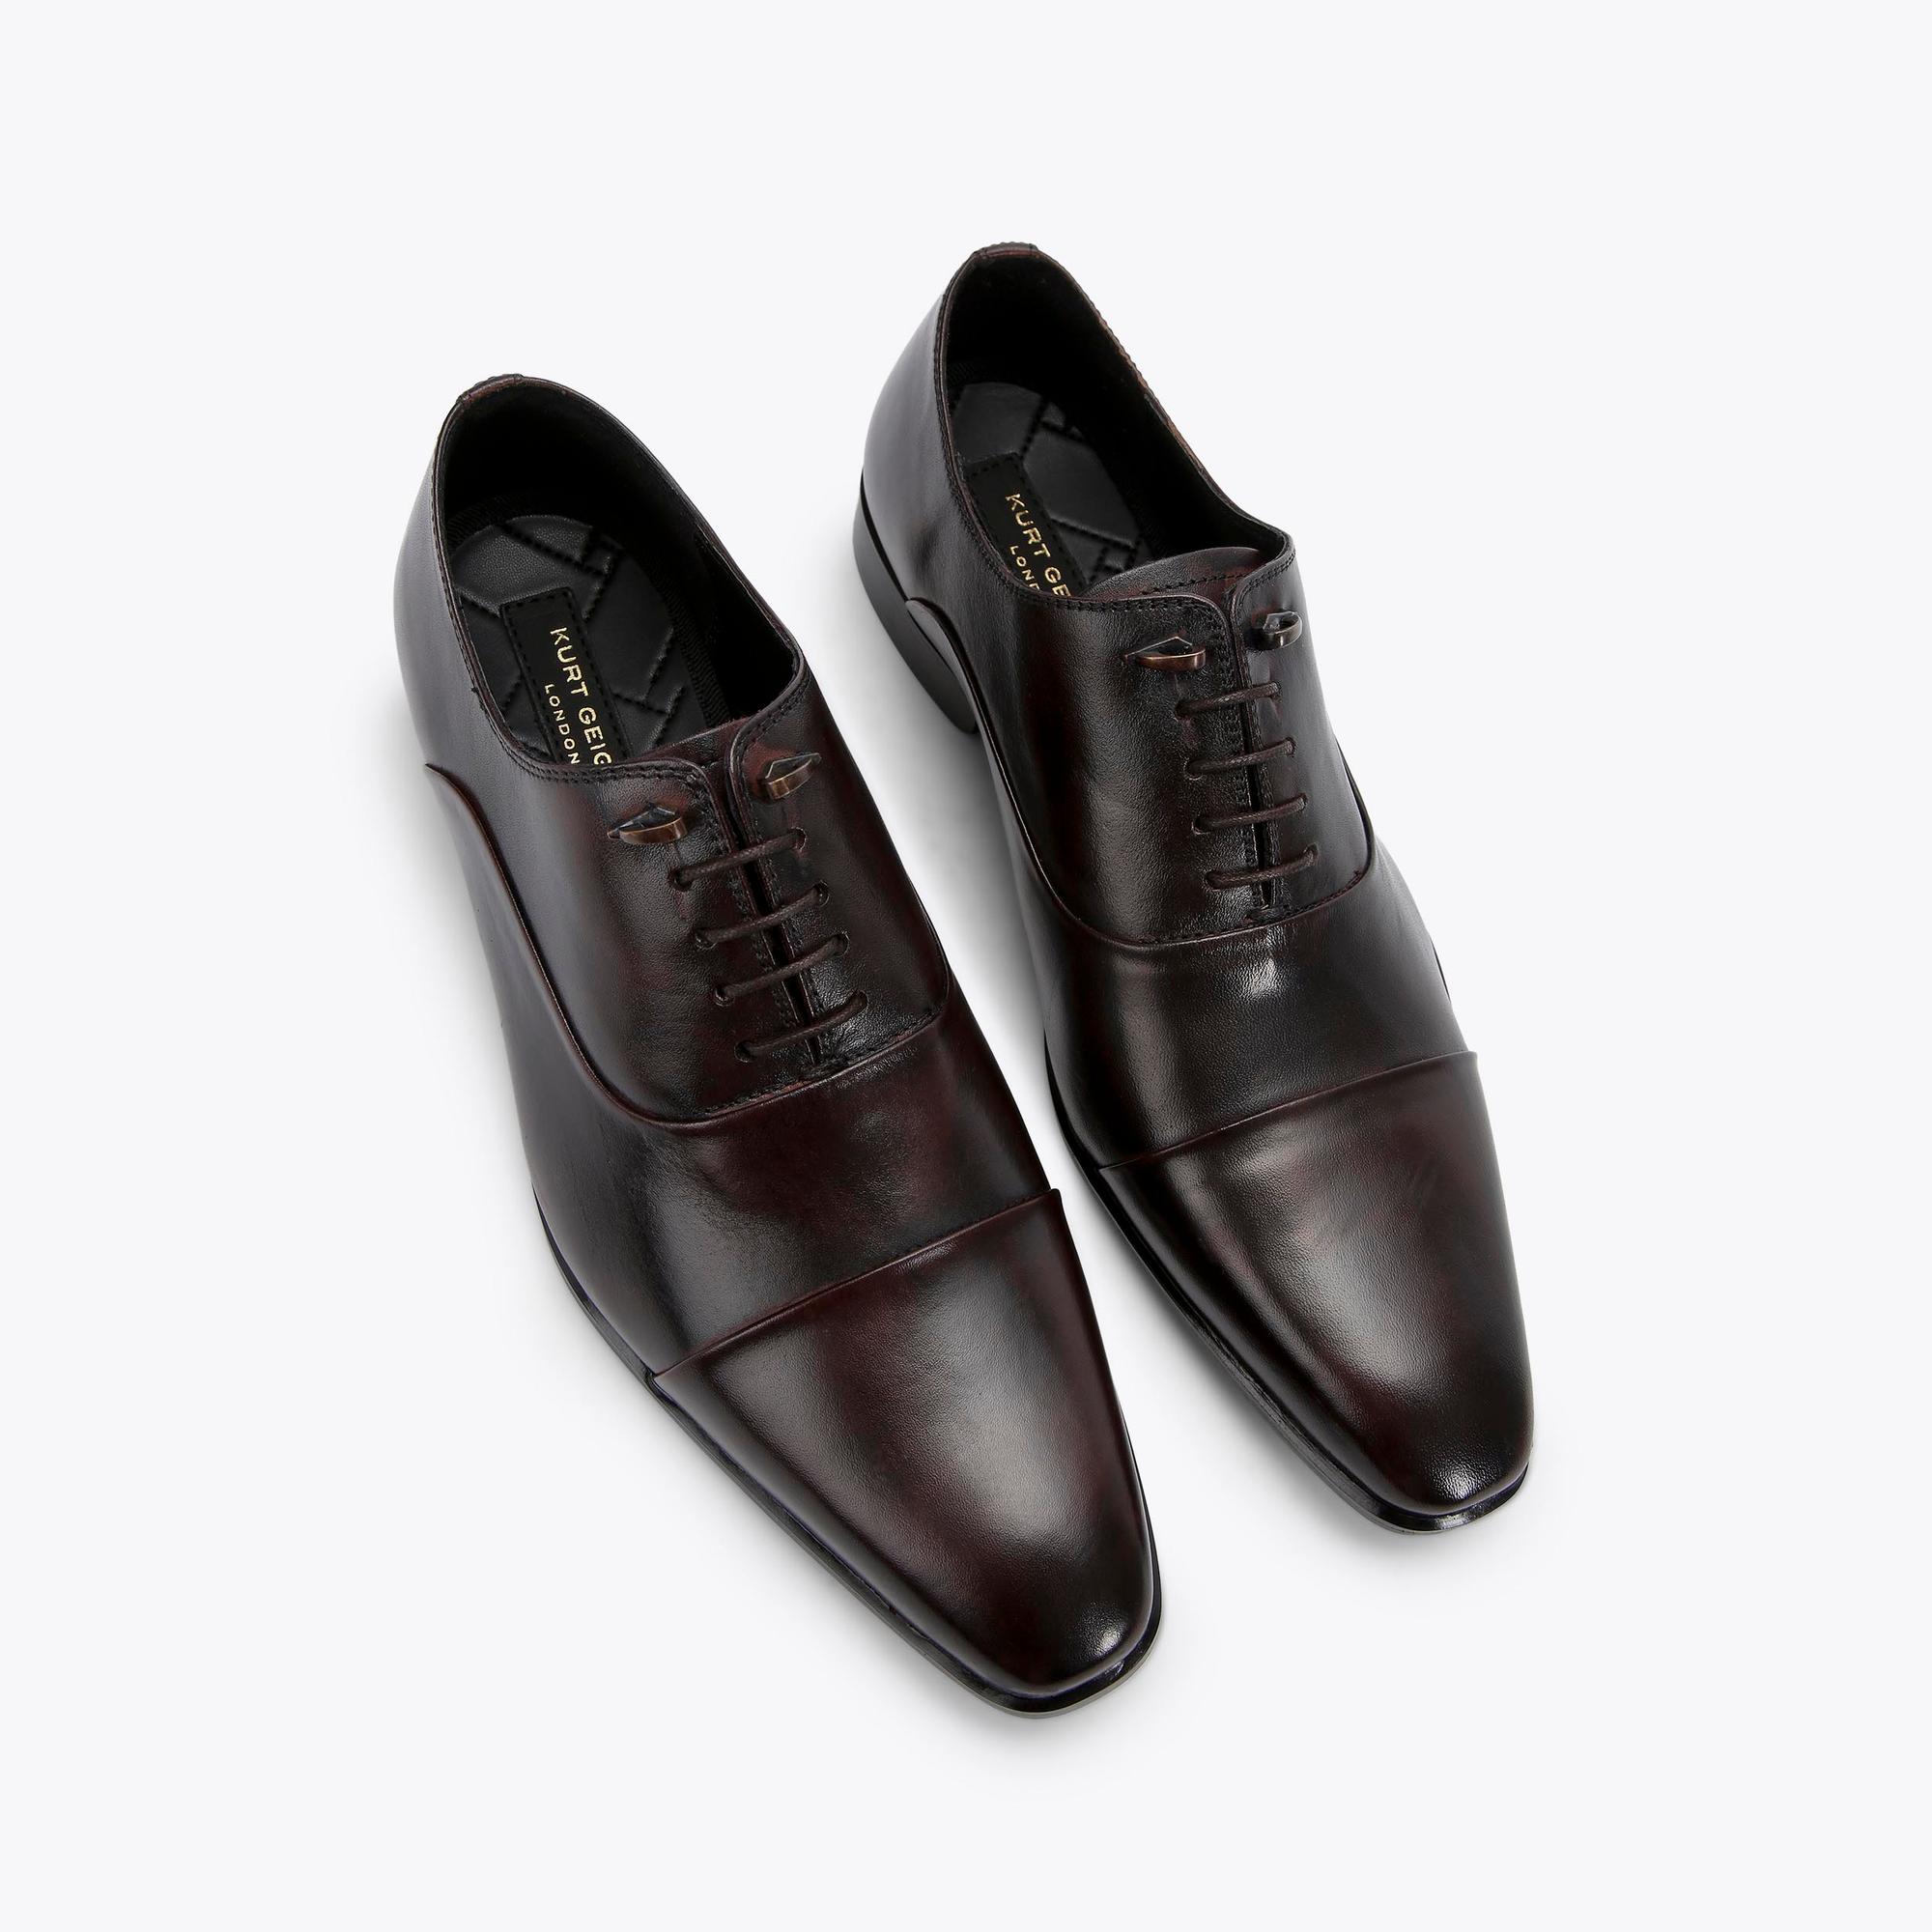 Mens Shoes Lace-ups Oxford shoes Kurt Geiger Sloane Embellished Patent-leather Oxford Shoes in Black for Men 